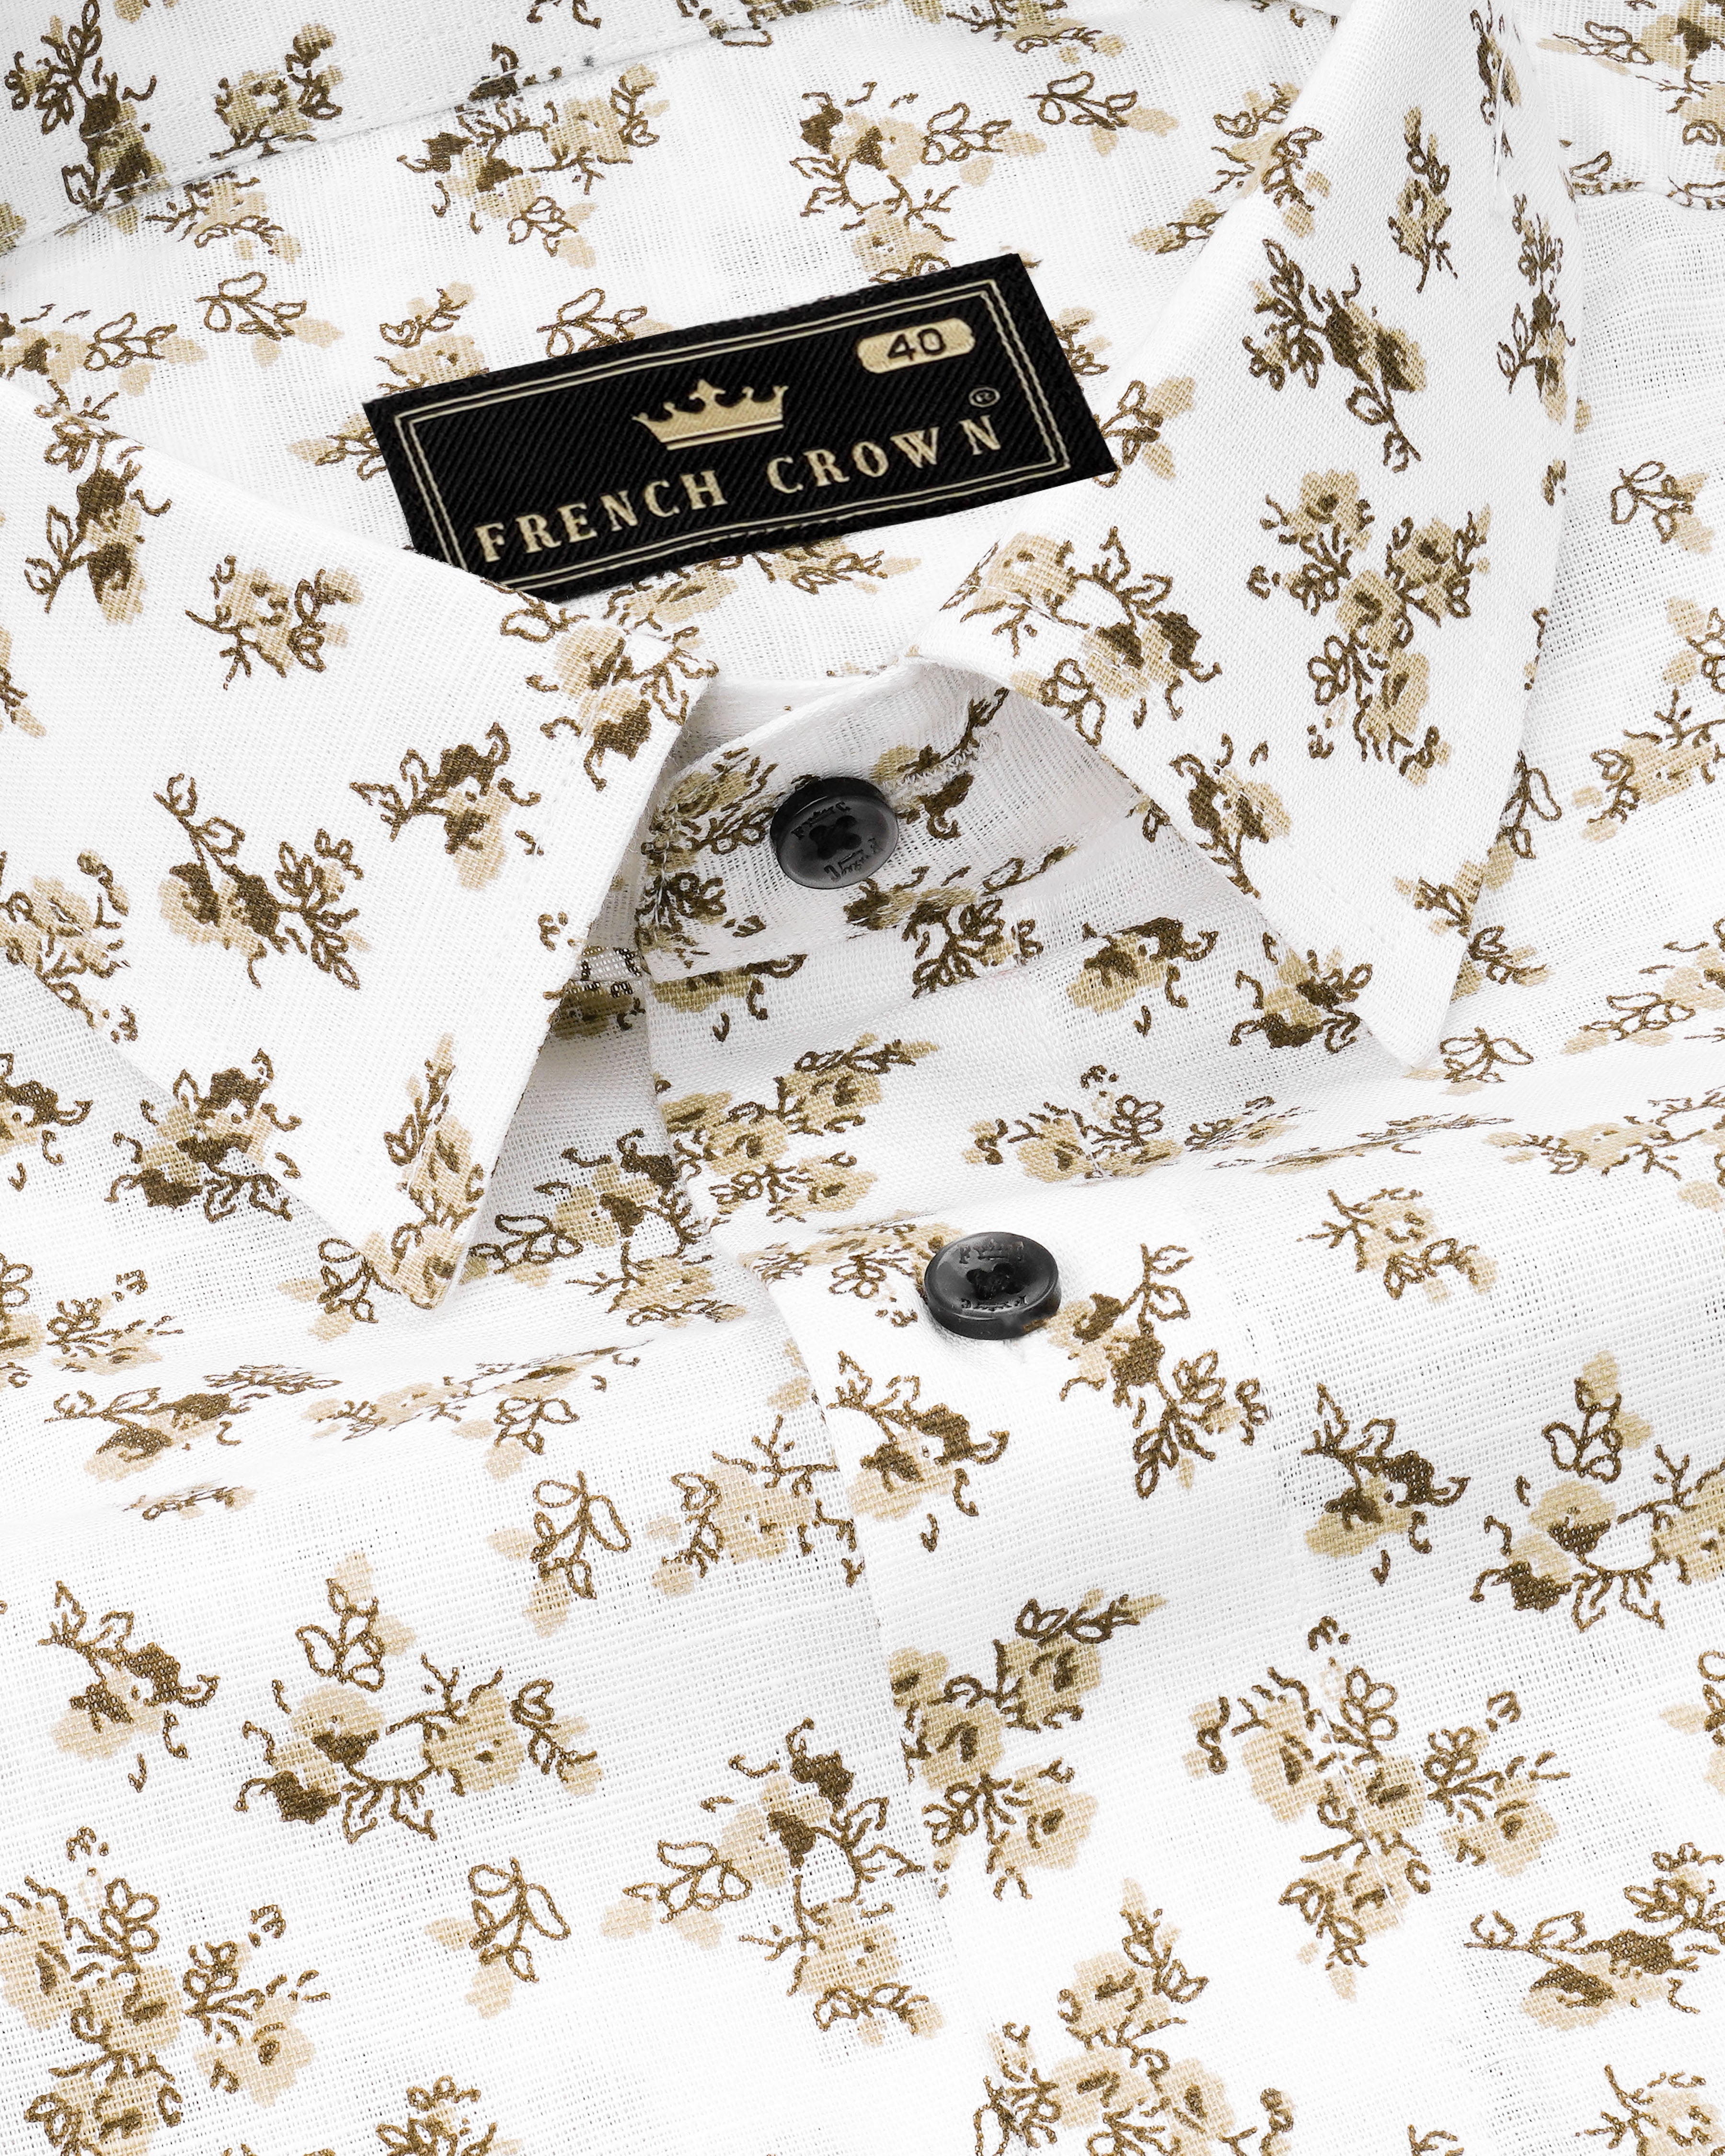 Amour White with Medium Taupe Brown Ditsy Printed Luxurious Linen Shirt 8273-BLK-38, 8273-BLK-H-38, 8273-BLK-39, 8273-BLK-H-39, 8273-BLK-40, 8273-BLK-H-40, 8273-BLK-42, 8273-BLK-H-42, 8273-BLK-44, 8273-BLK-H-44, 8273-BLK-46, 8273-BLK-H-46, 8273-BLK-48, 8273-BLK-H-48, 8273-BLK-50, 8273-BLK-H-50, 8273-BLK-52, 8273-BLK-H-52